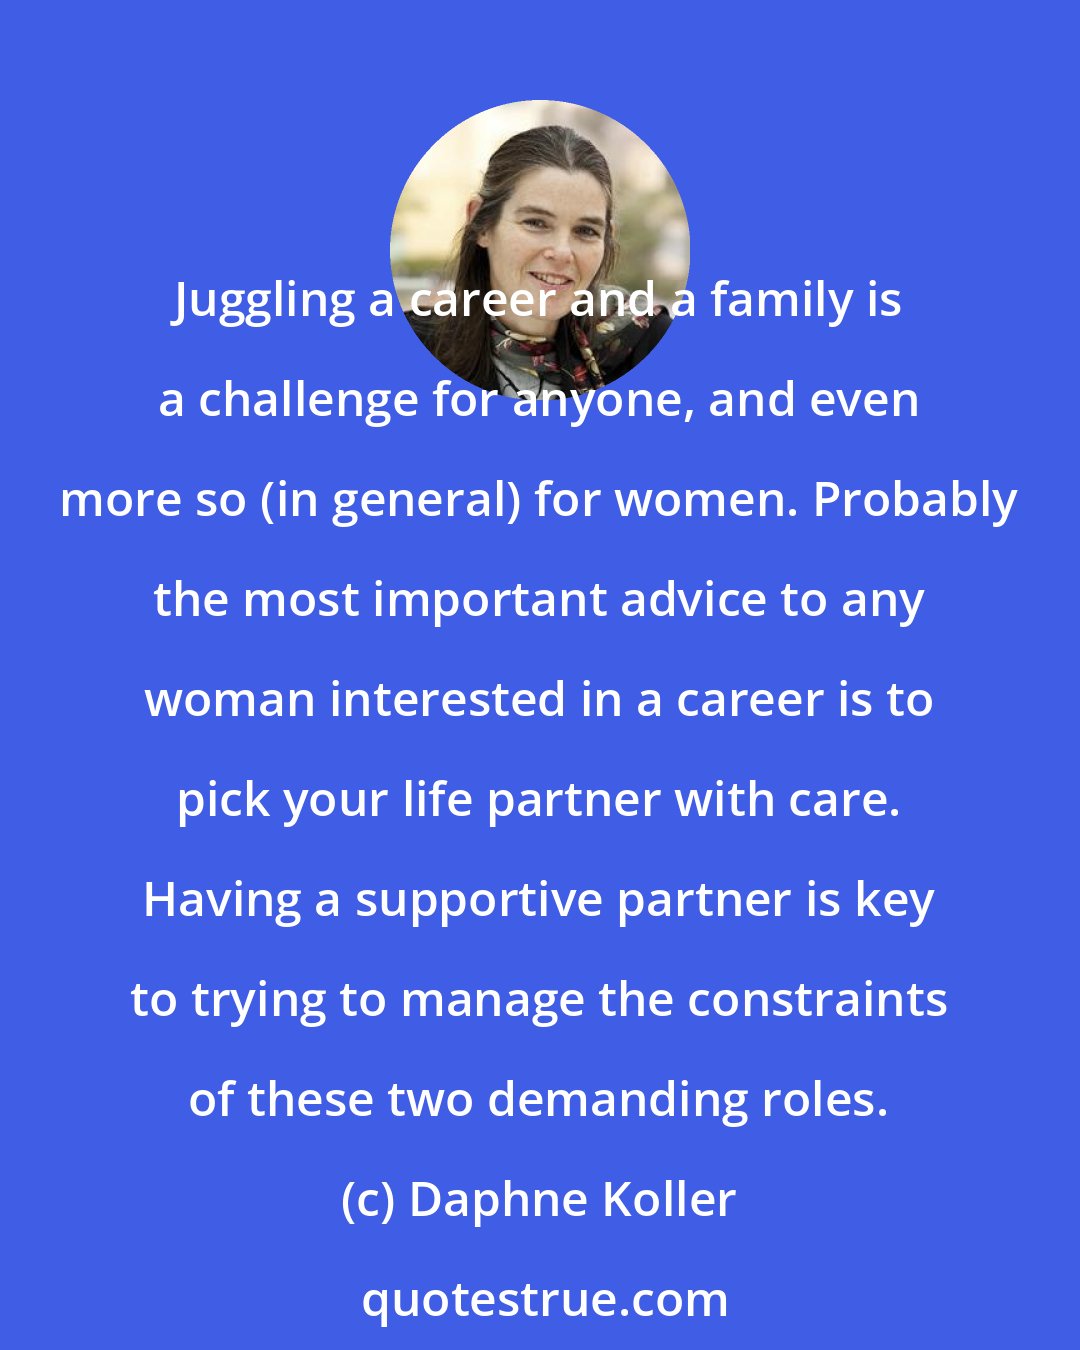 Daphne Koller: Juggling a career and a family is a challenge for anyone, and even more so (in general) for women. Probably the most important advice to any woman interested in a career is to pick your life partner with care. Having a supportive partner is key to trying to manage the constraints of these two demanding roles.